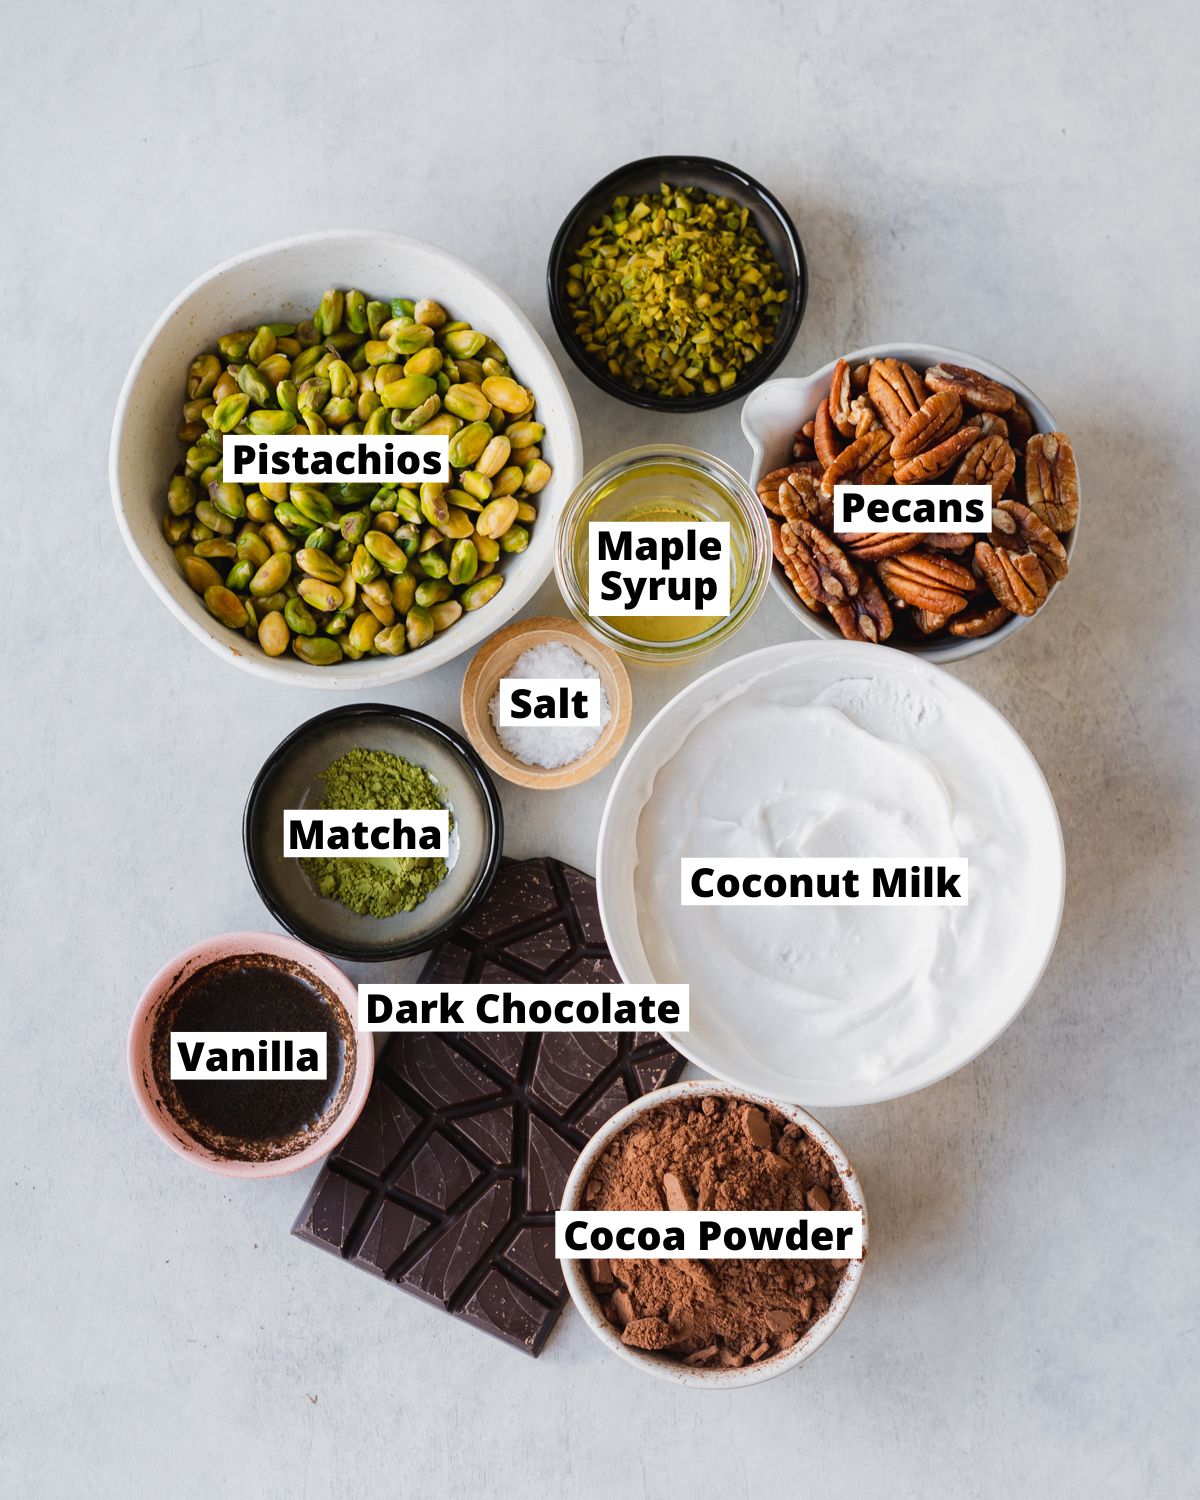 ingredients for chocolate pistachio tart measured out in bowls.